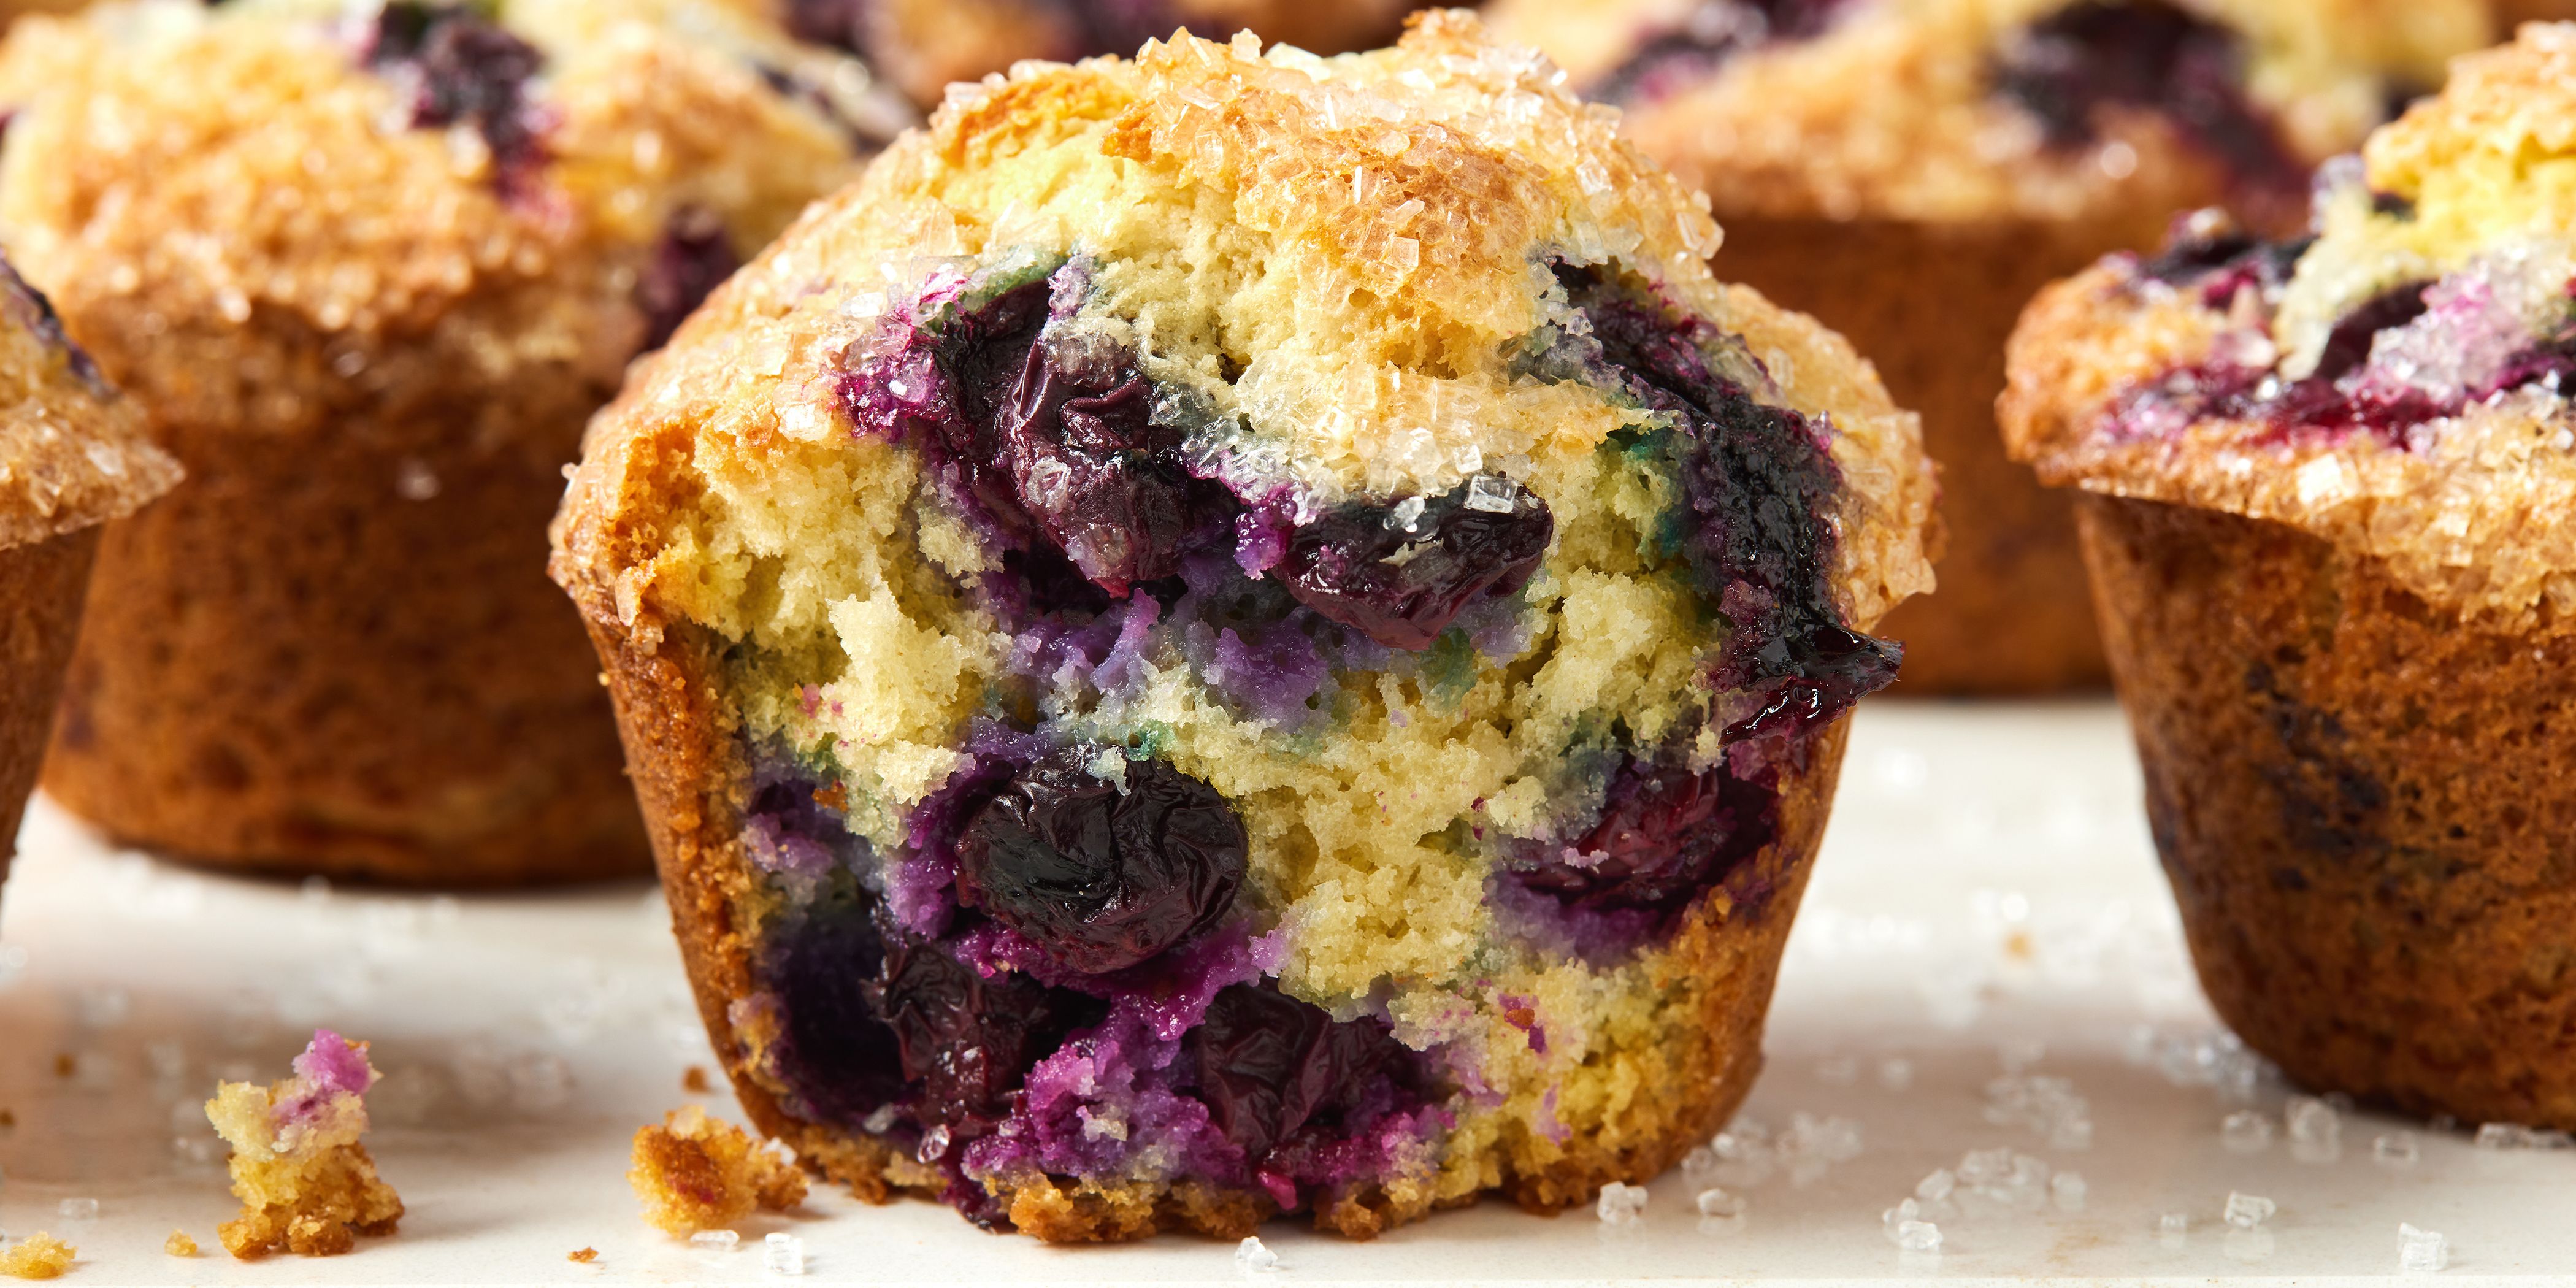 Easy Blueberry Muffin Recipe VIDEO Homemade Blueberry Muffin